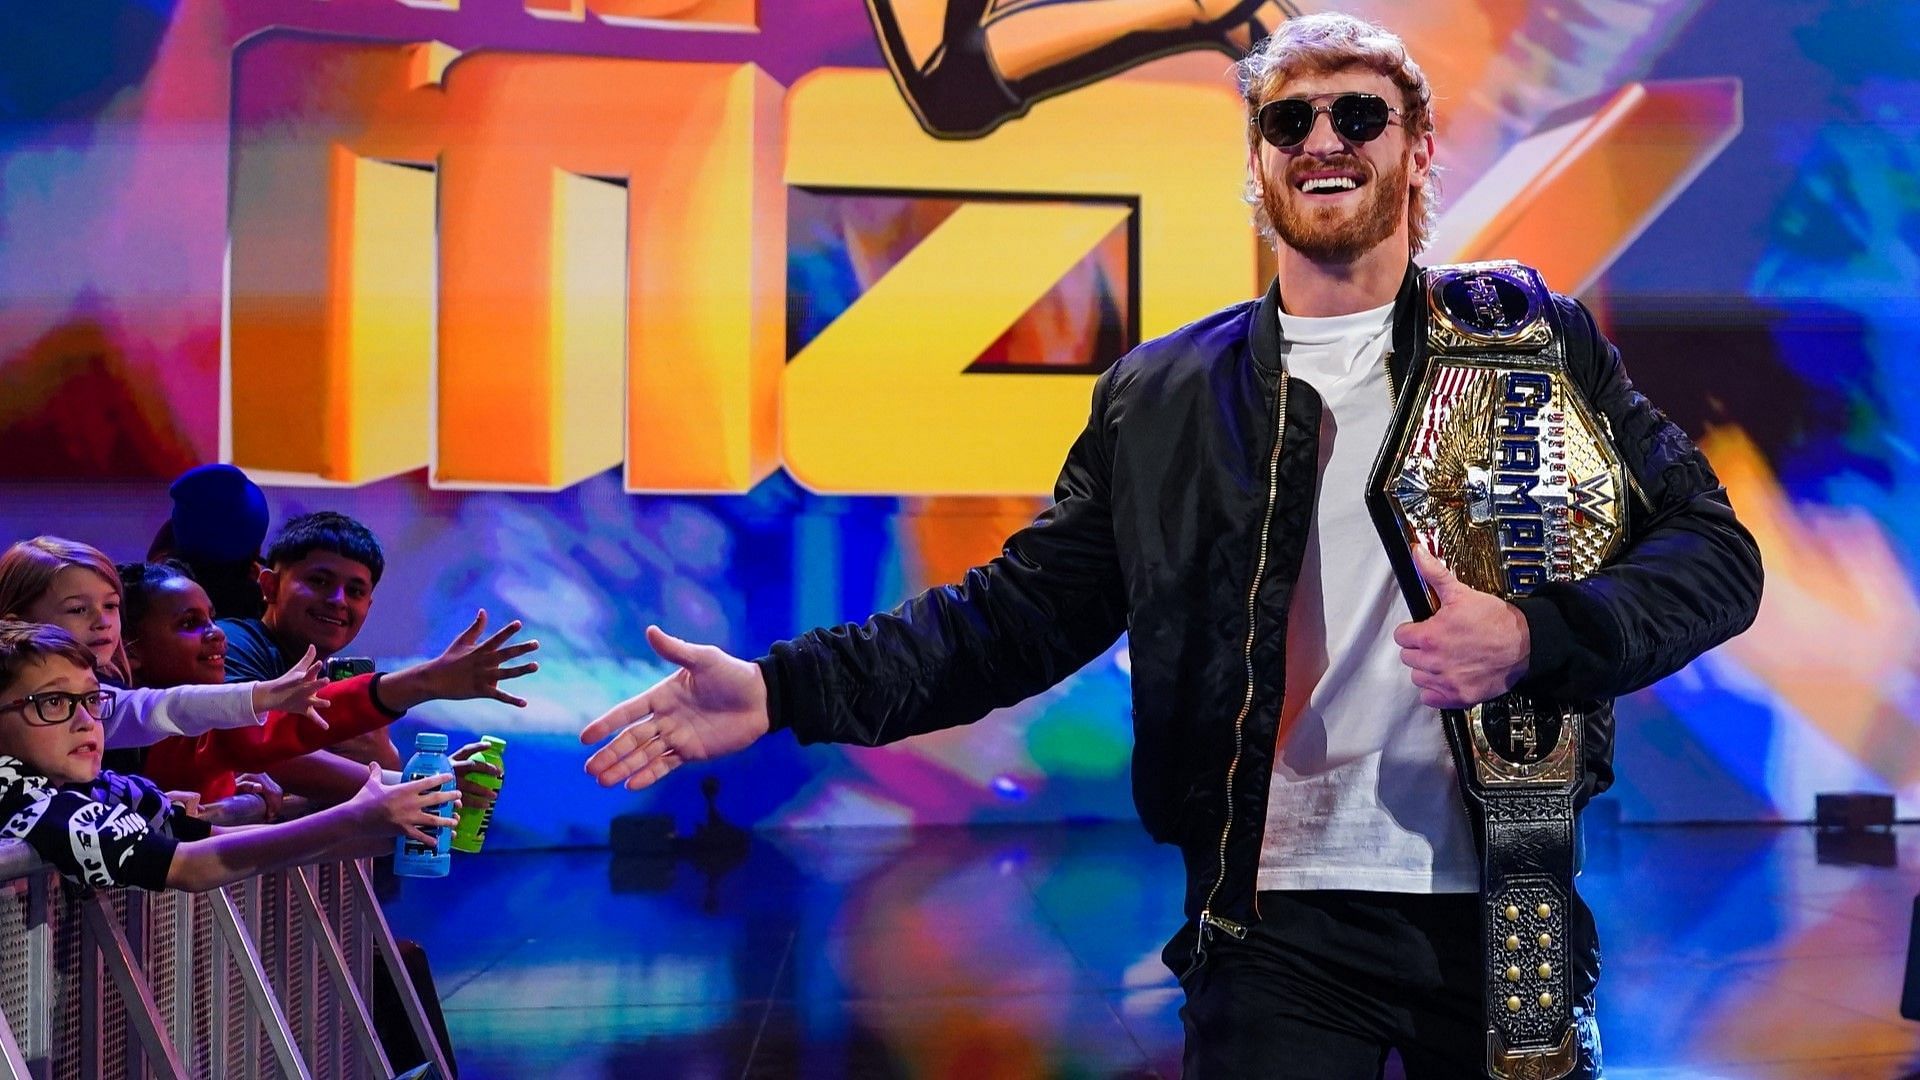 Logan Paul heads to the ring with the WWE United States Championship